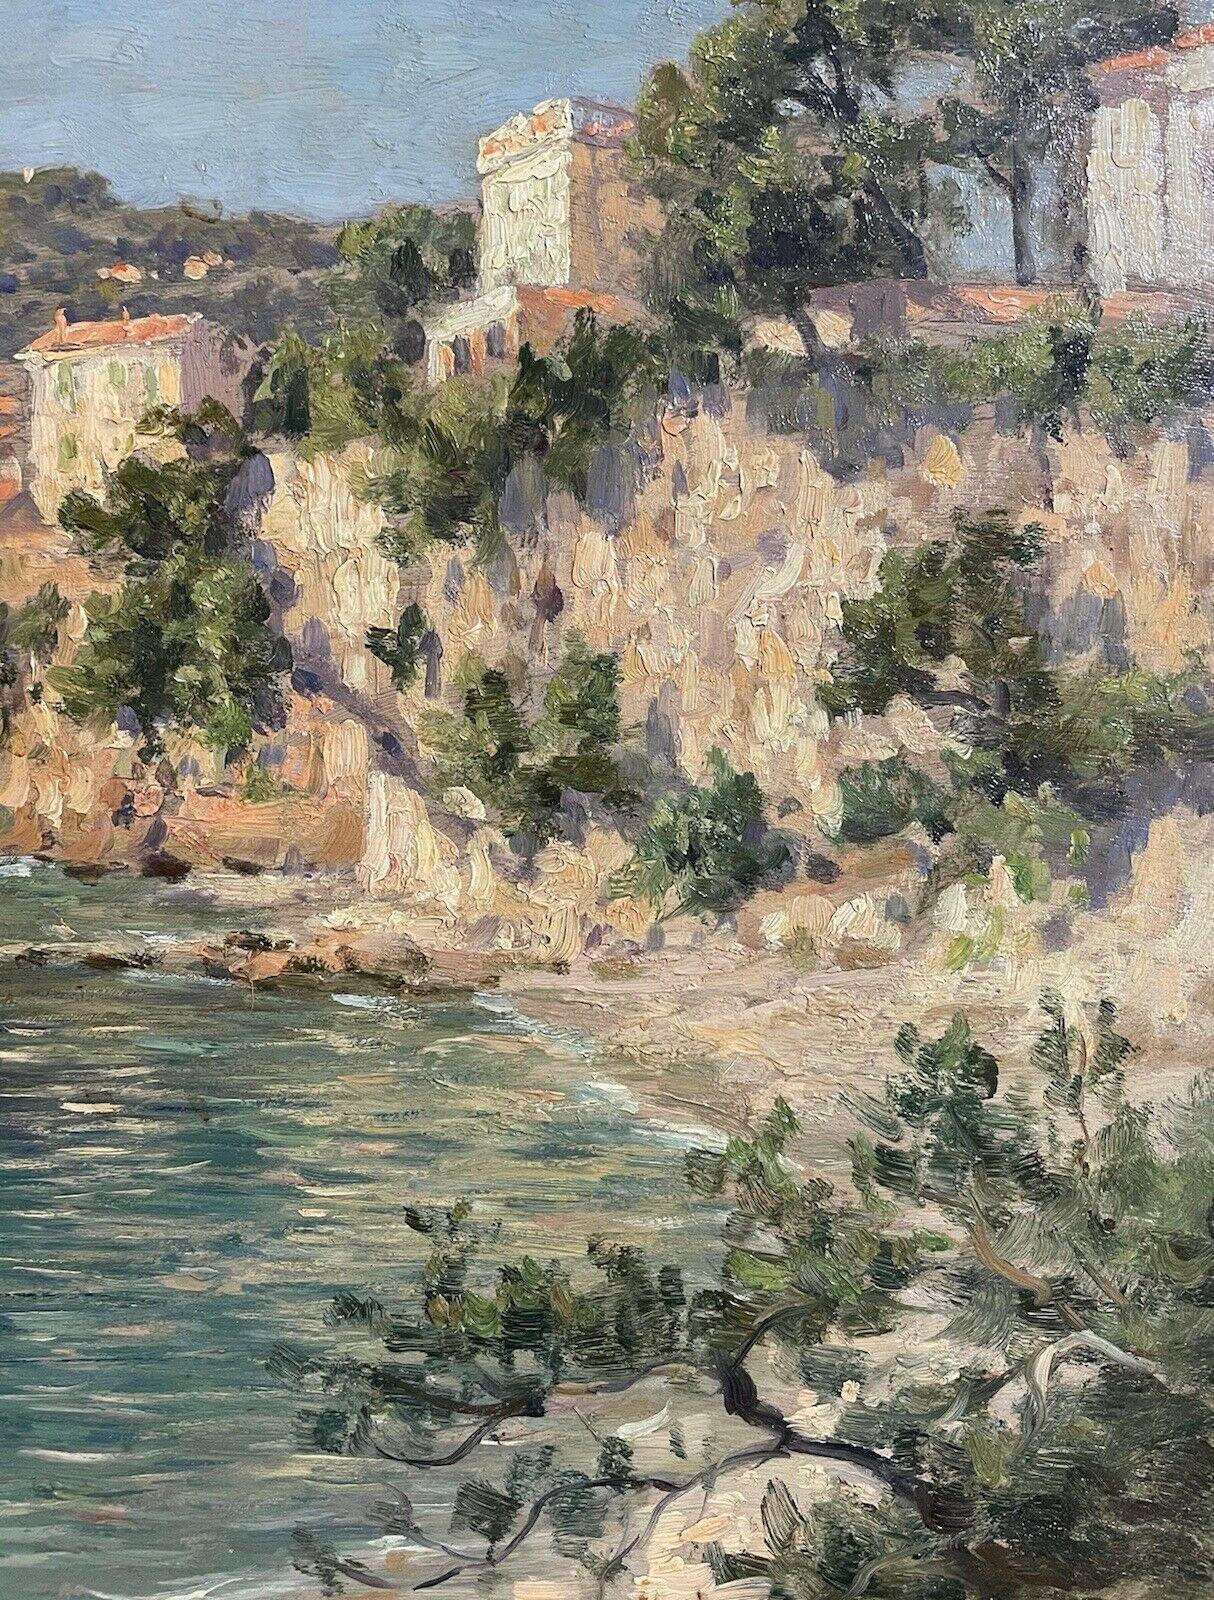 Artist/ School: Felix Planquette 1873-1964, French. Signed lower corner.

Title: The Tranquil Coastline of the South of France.

Medium: oil painting, on board. 

Size:      frame: 17 x 20 inches
           painting: 13 x 16 inches
       